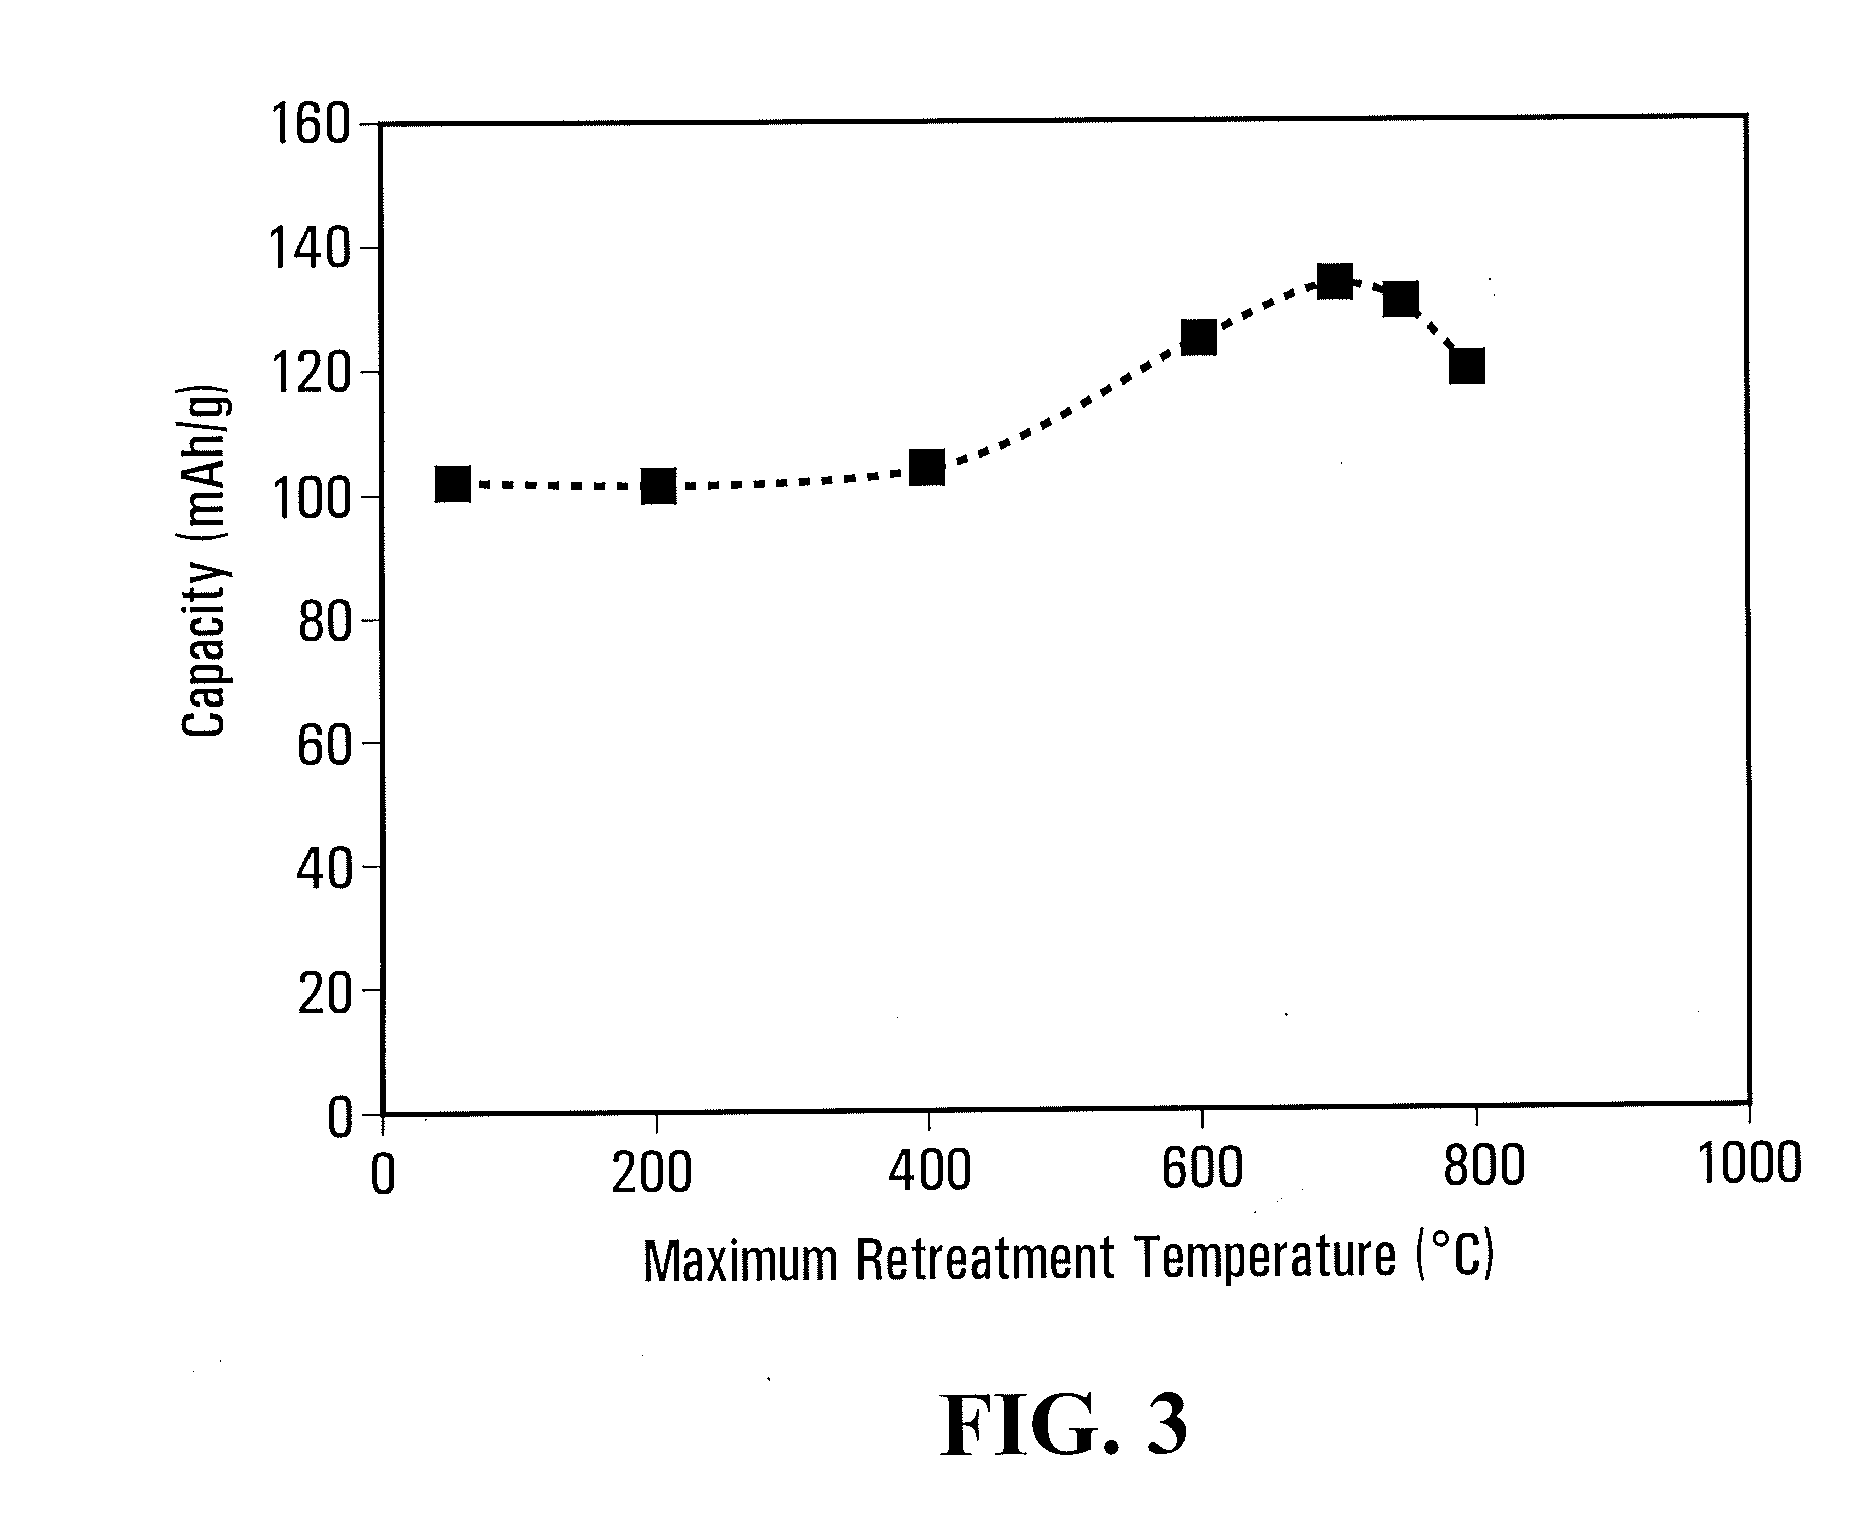 Method for improving the electrochemical performances of an alkali metal oxyanion electrode material and alkali metal oxyanion electrode material obtained therefrom